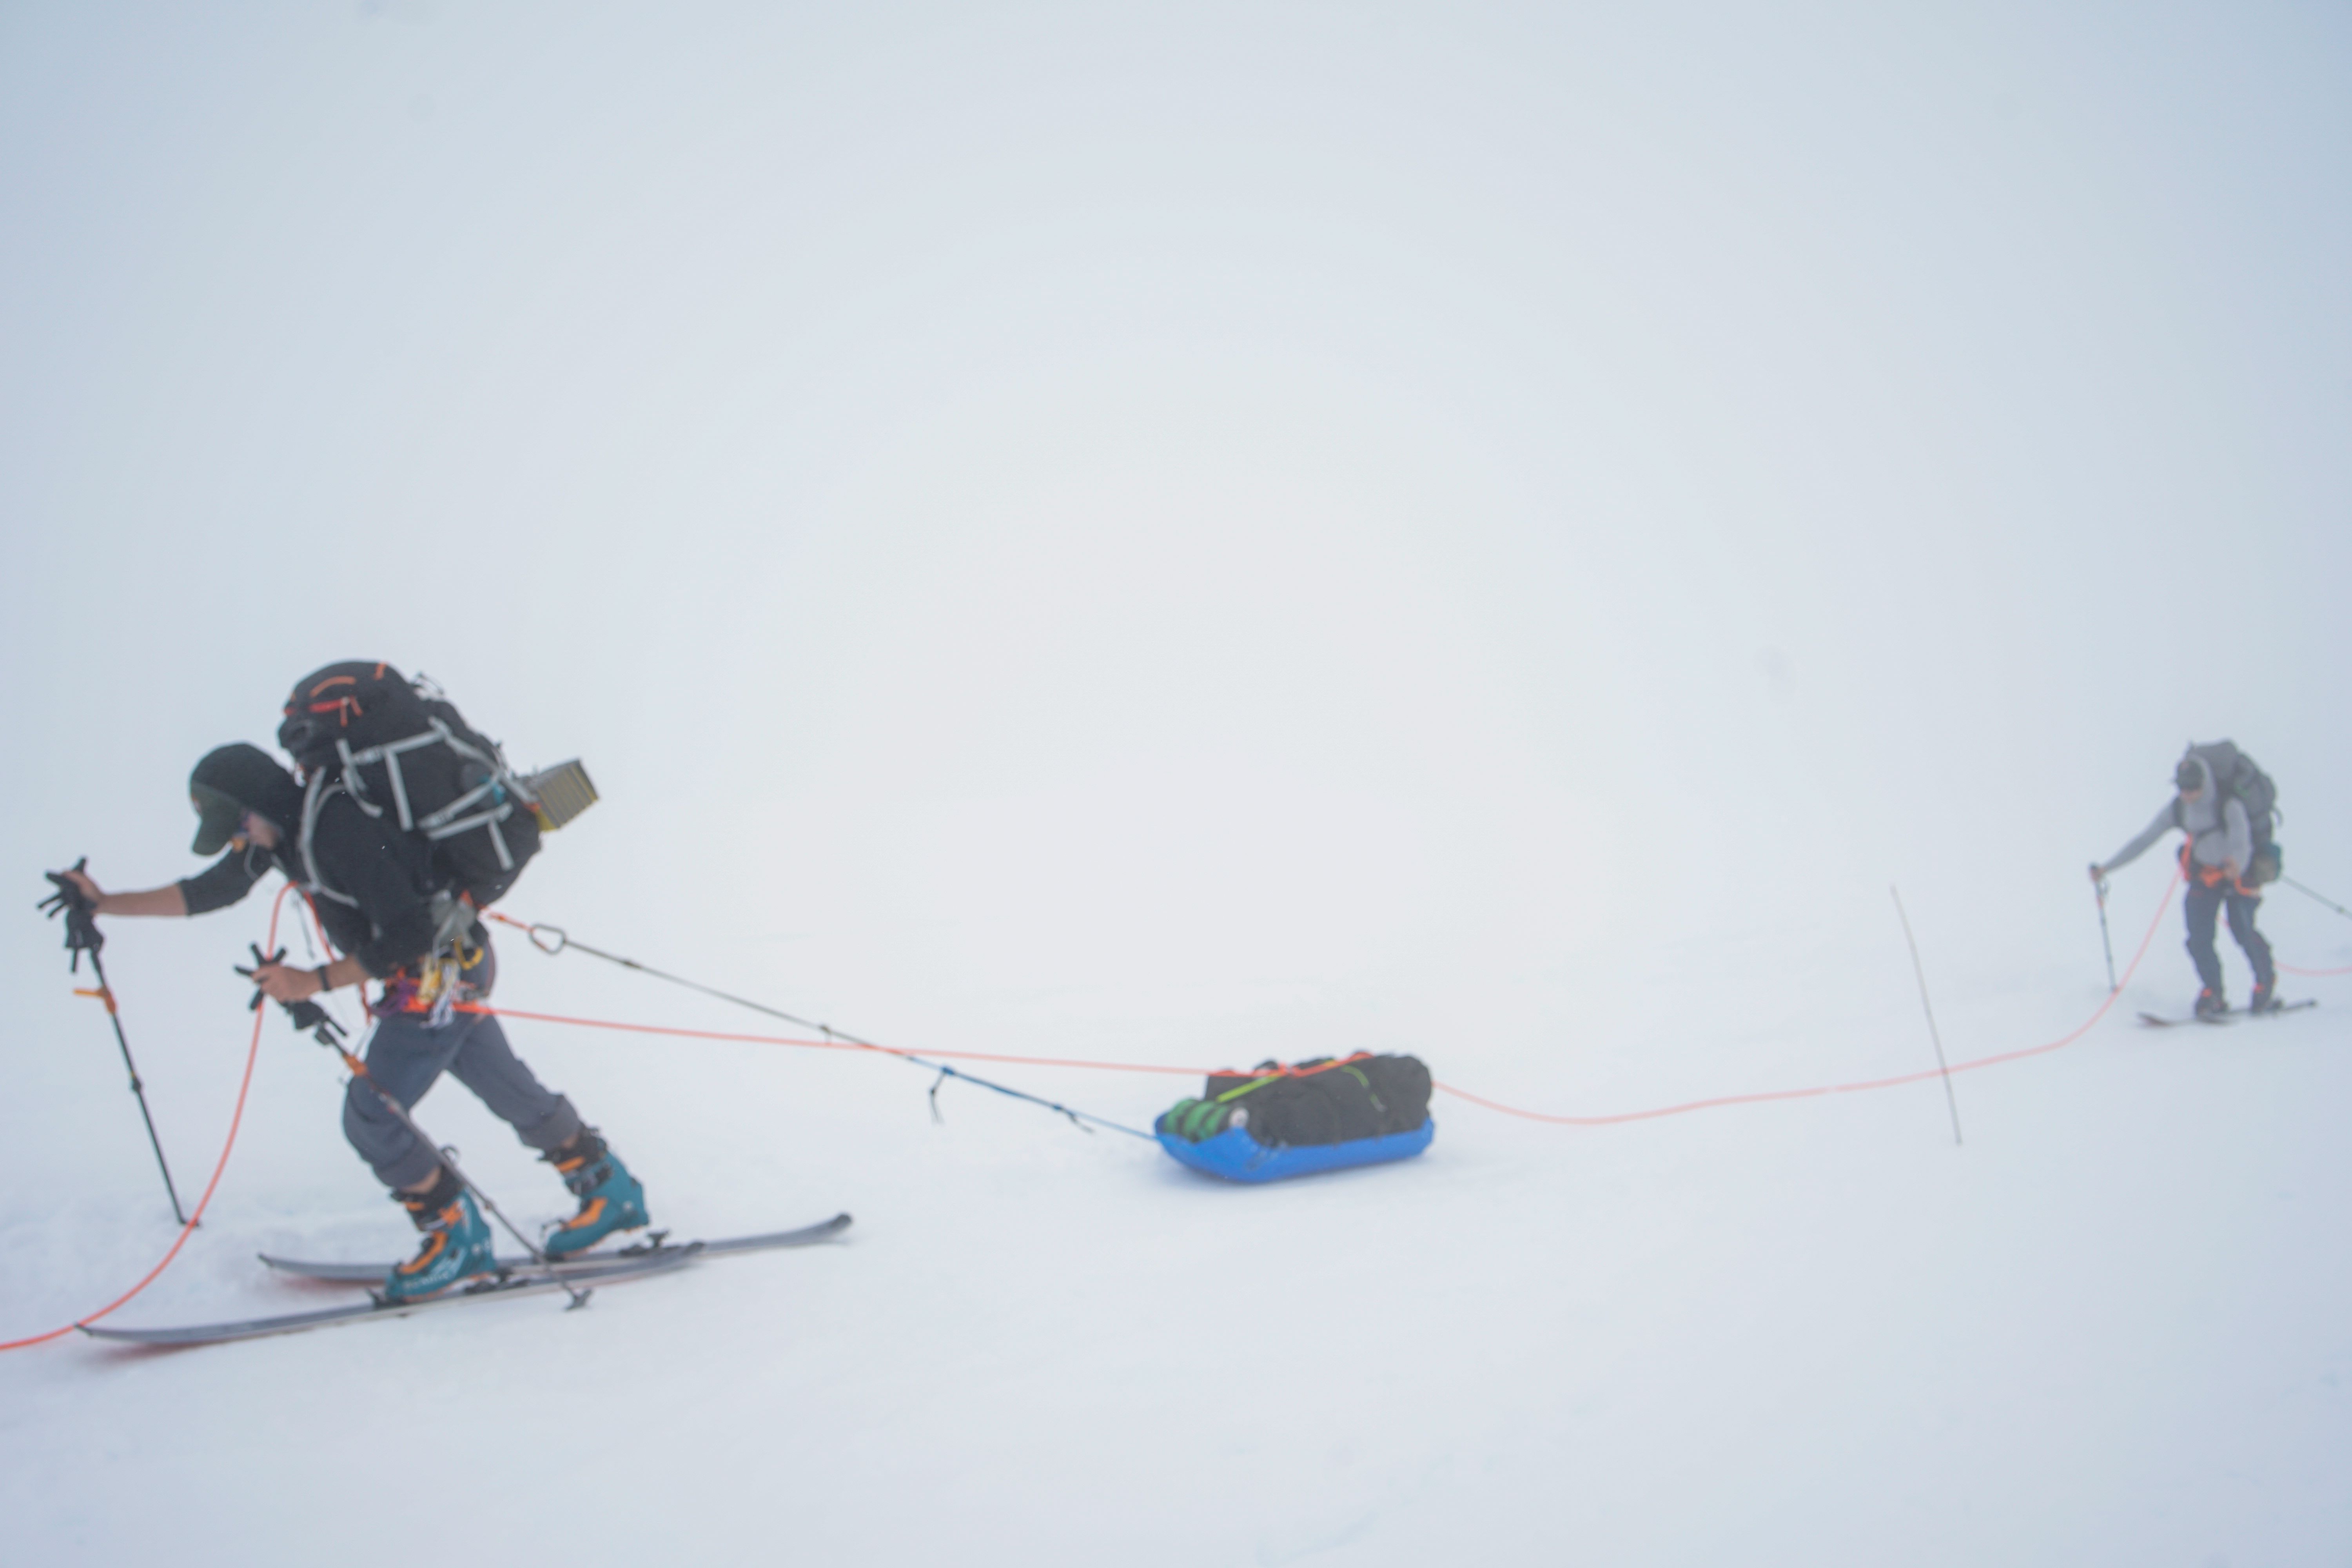 Two roped climbers ski uphill in a whiteout, the lead climber pulling a heavy sled